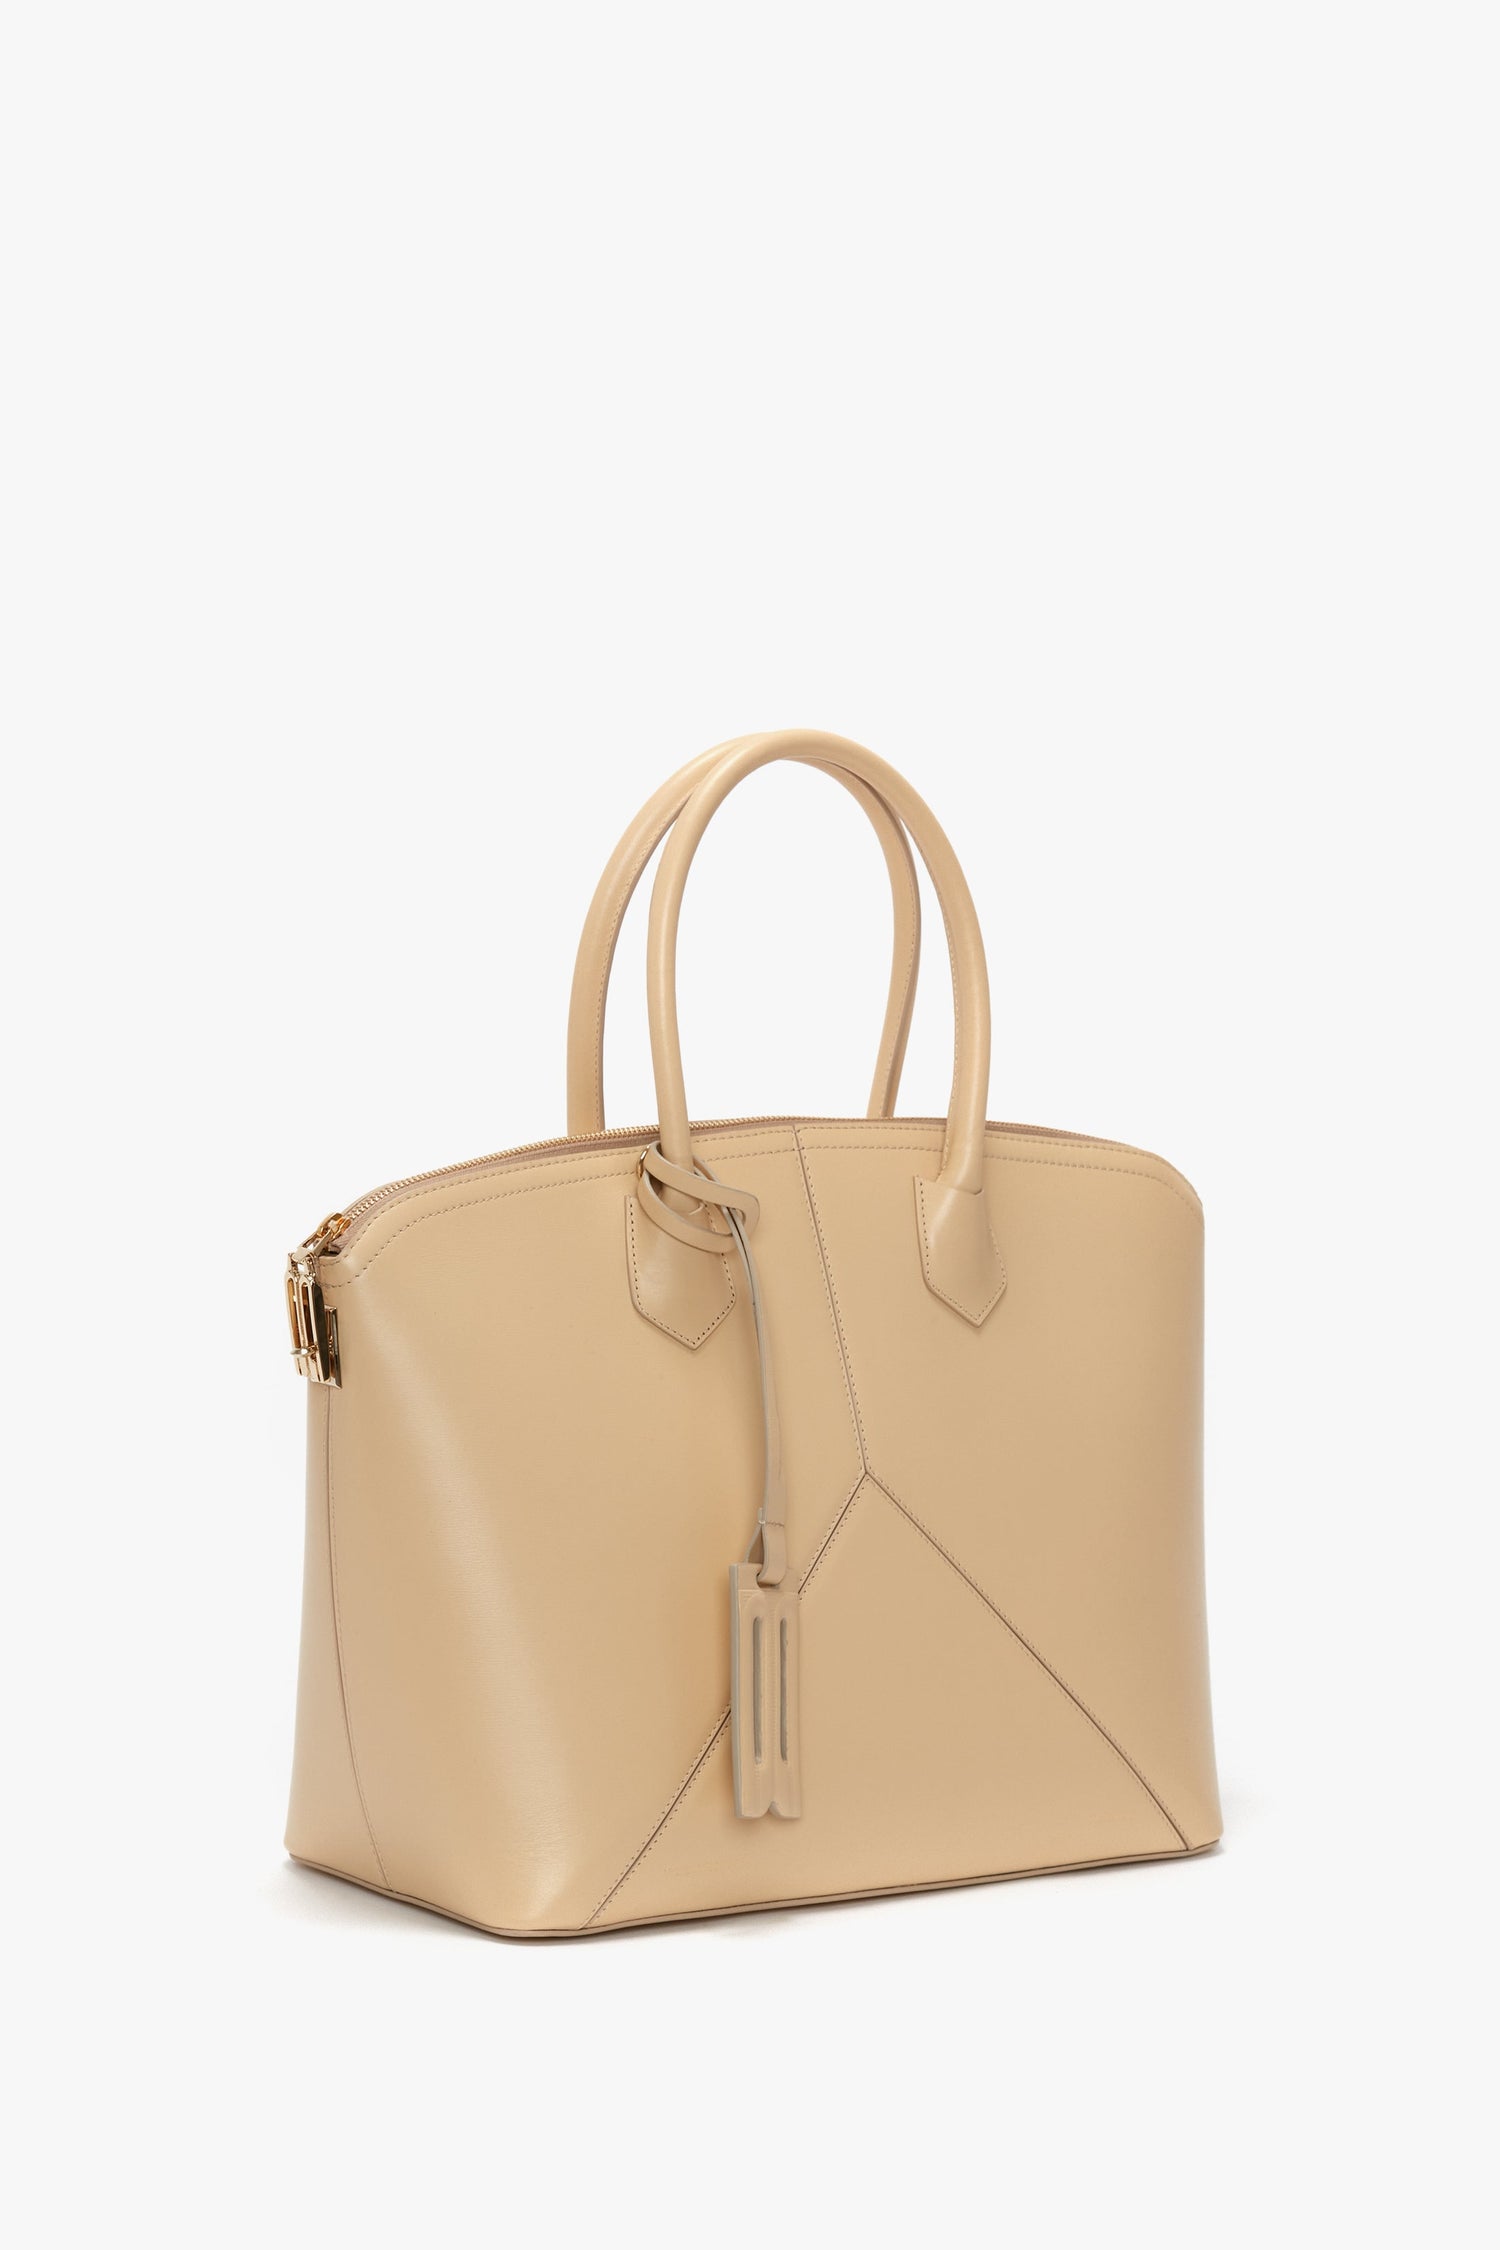 A tan leather Victoria Bag In Sesame Leather by Victoria Beckham featuring double handles, leather panels with a geometric design, and a hanging tag detail, all set against a white background.